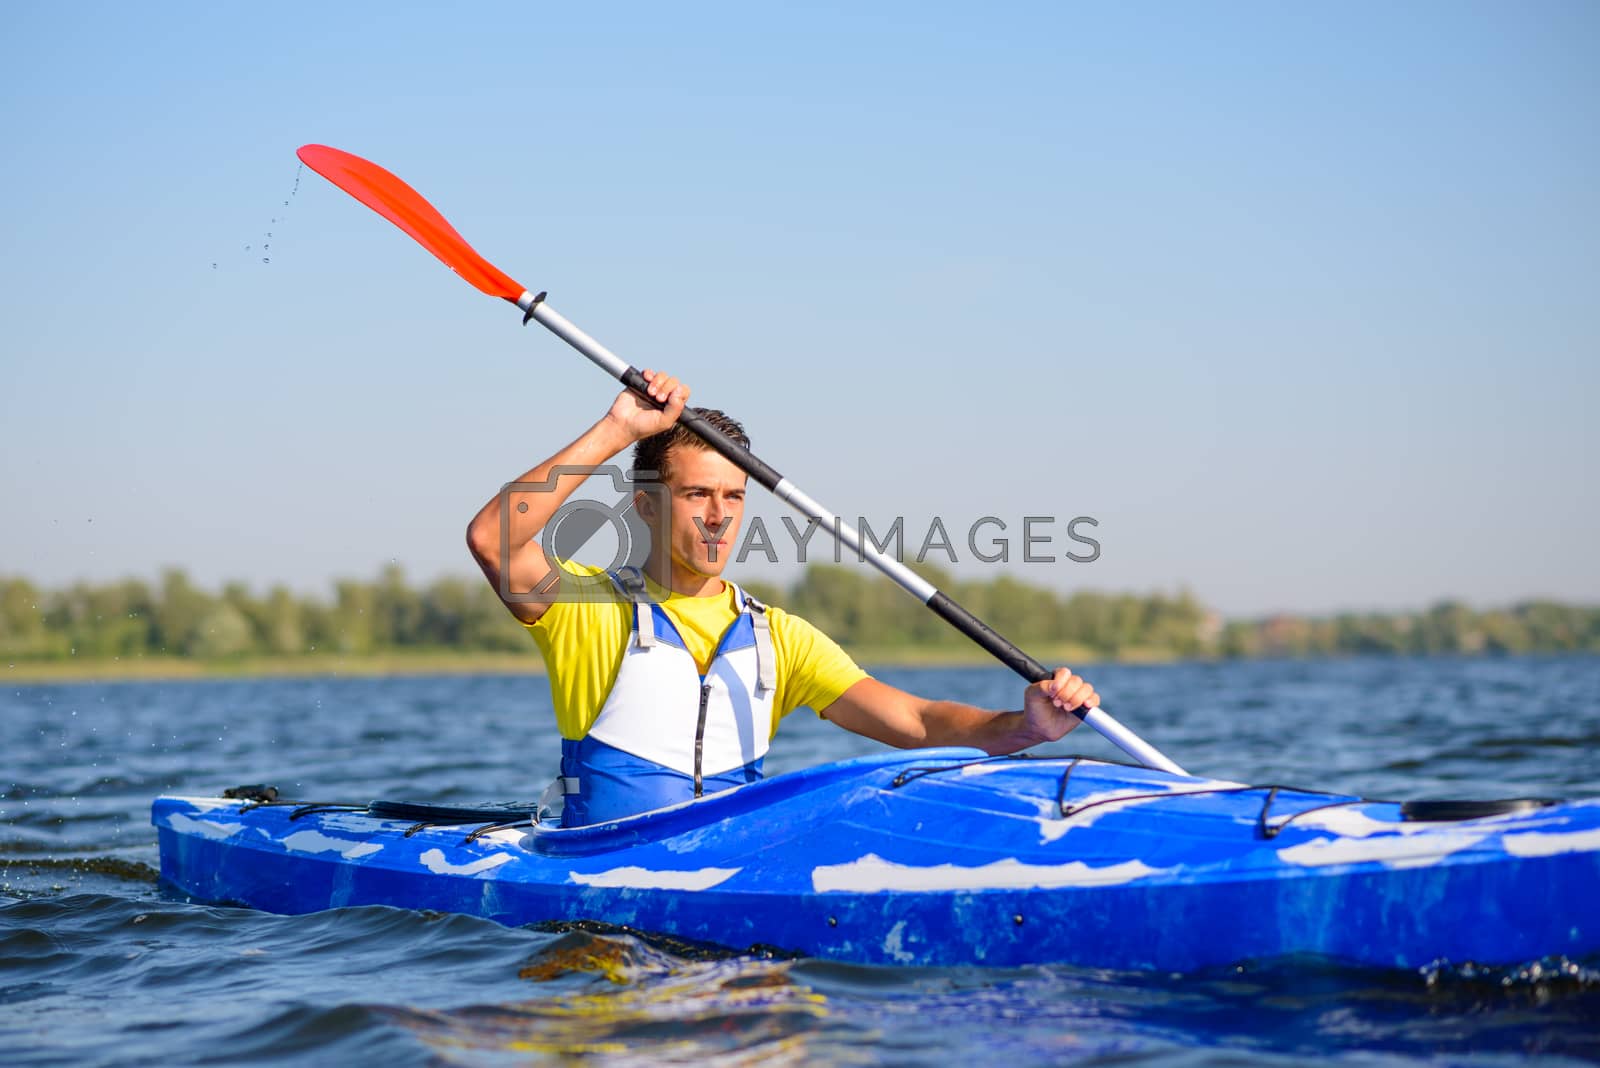 Royalty free image of Young Professional Kayaker Paddling Kayak on River under Bright Morning Sun. Sport and Active Lifestyle Concept by maxpro